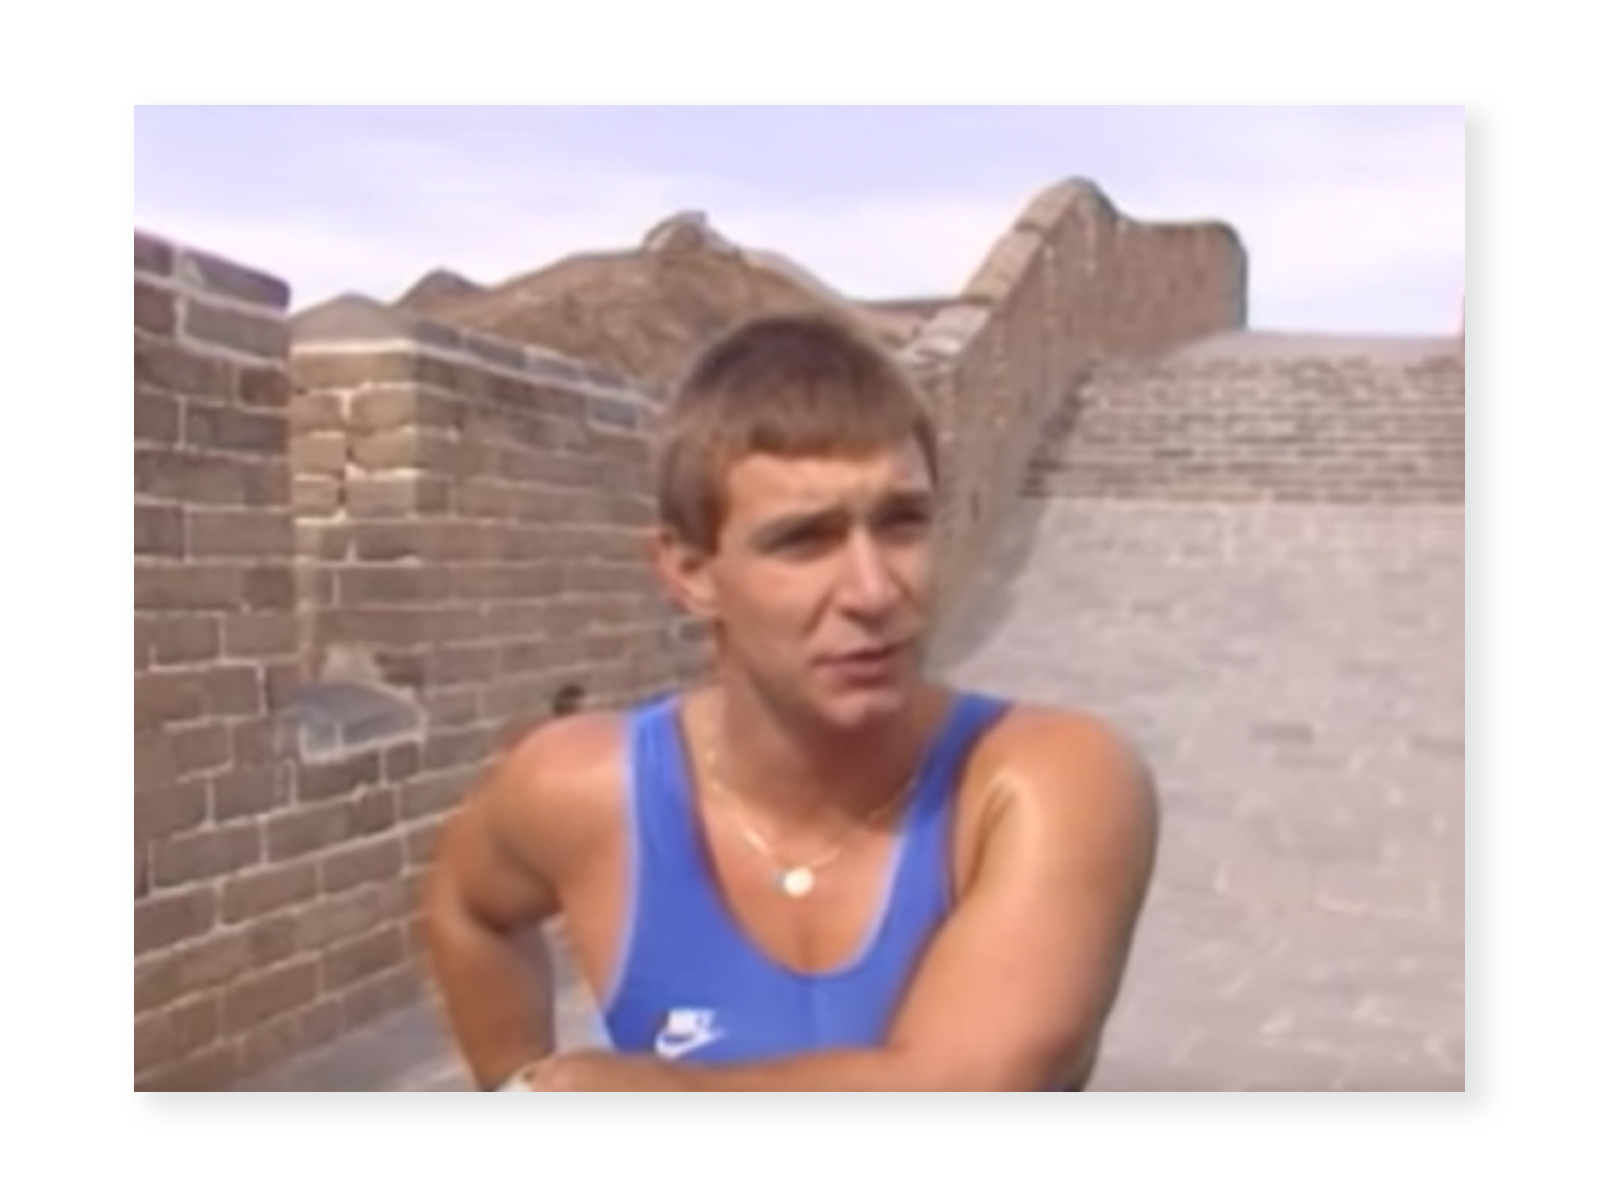 Screenshot from "Rick Hansen Man In Motion World Tour - Great Wall of China" video of Rick Hansen from his chest up on the Great Wall of China. He is wearing a blue track shirt with a white Nike Logo, and looks to be answering a question.